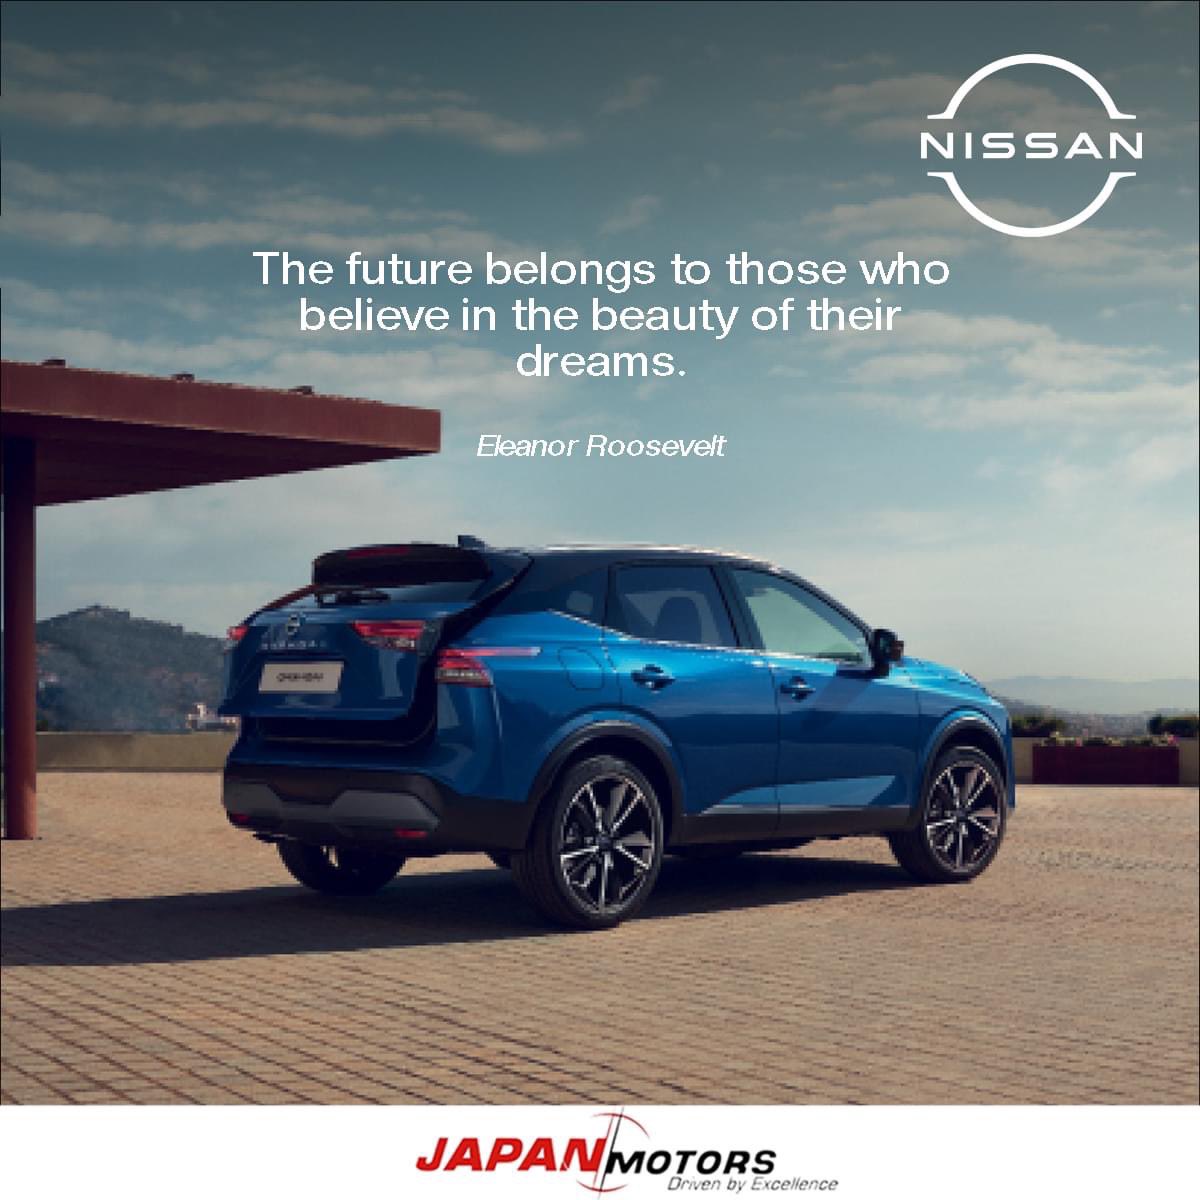 The future belongs to those who believe in the beauty of their dreams. - Eleanor Roosevelt #MotivationalMonday #JapanMotors #NissanGhana #SolidarityForever #Nissan #NissanRoadTripReady